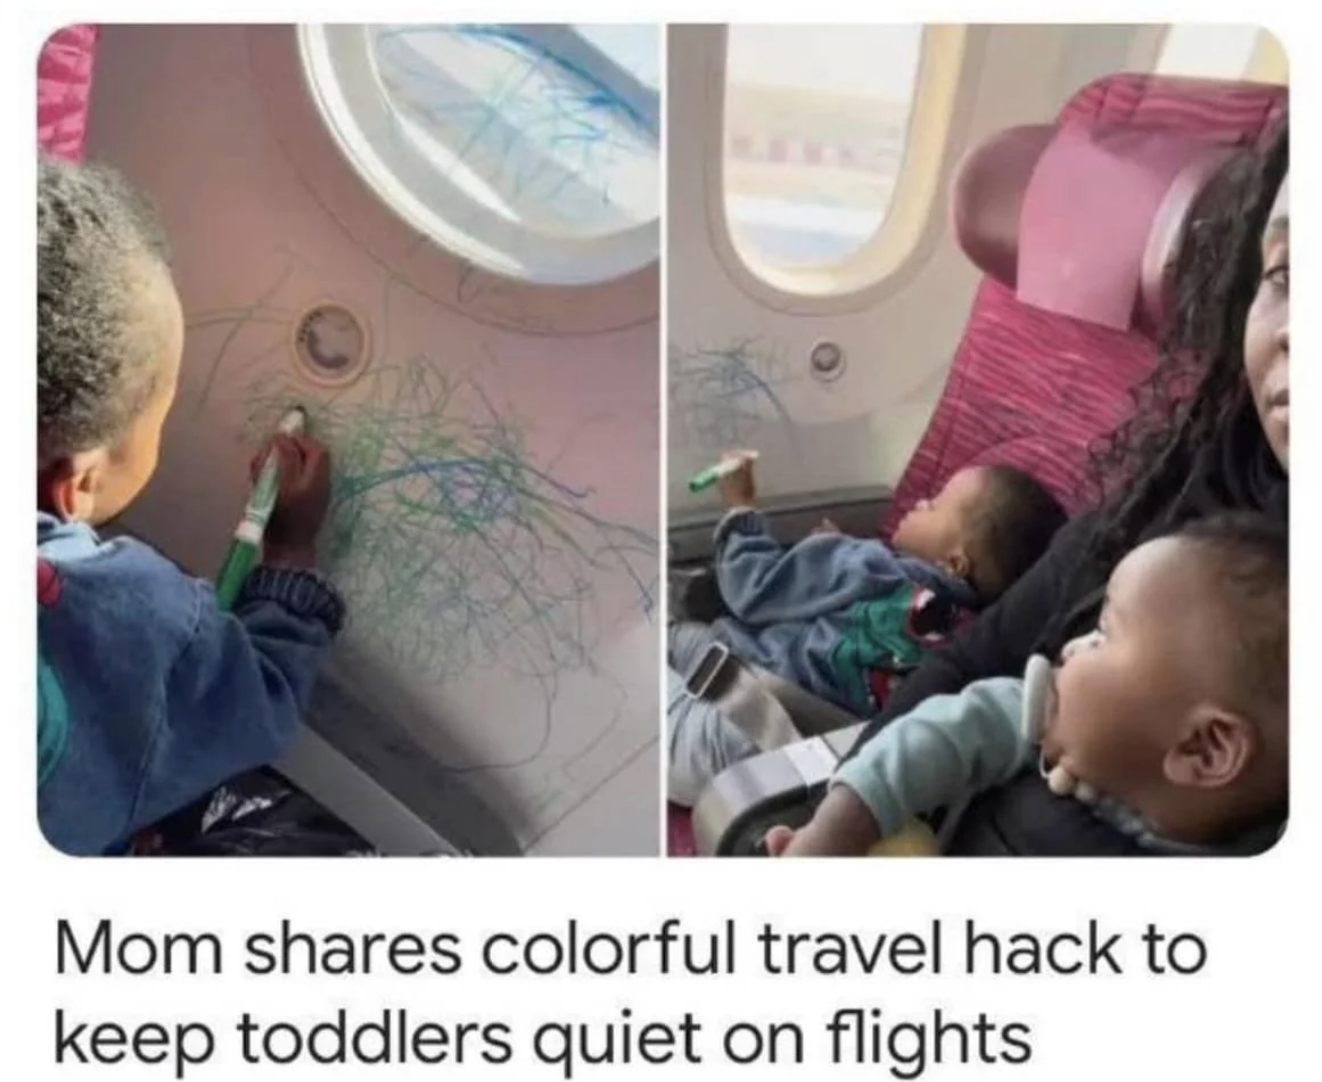 mom shares colorful travel hack - 02 Mom colorful travel hack to keep toddlers quiet on flights